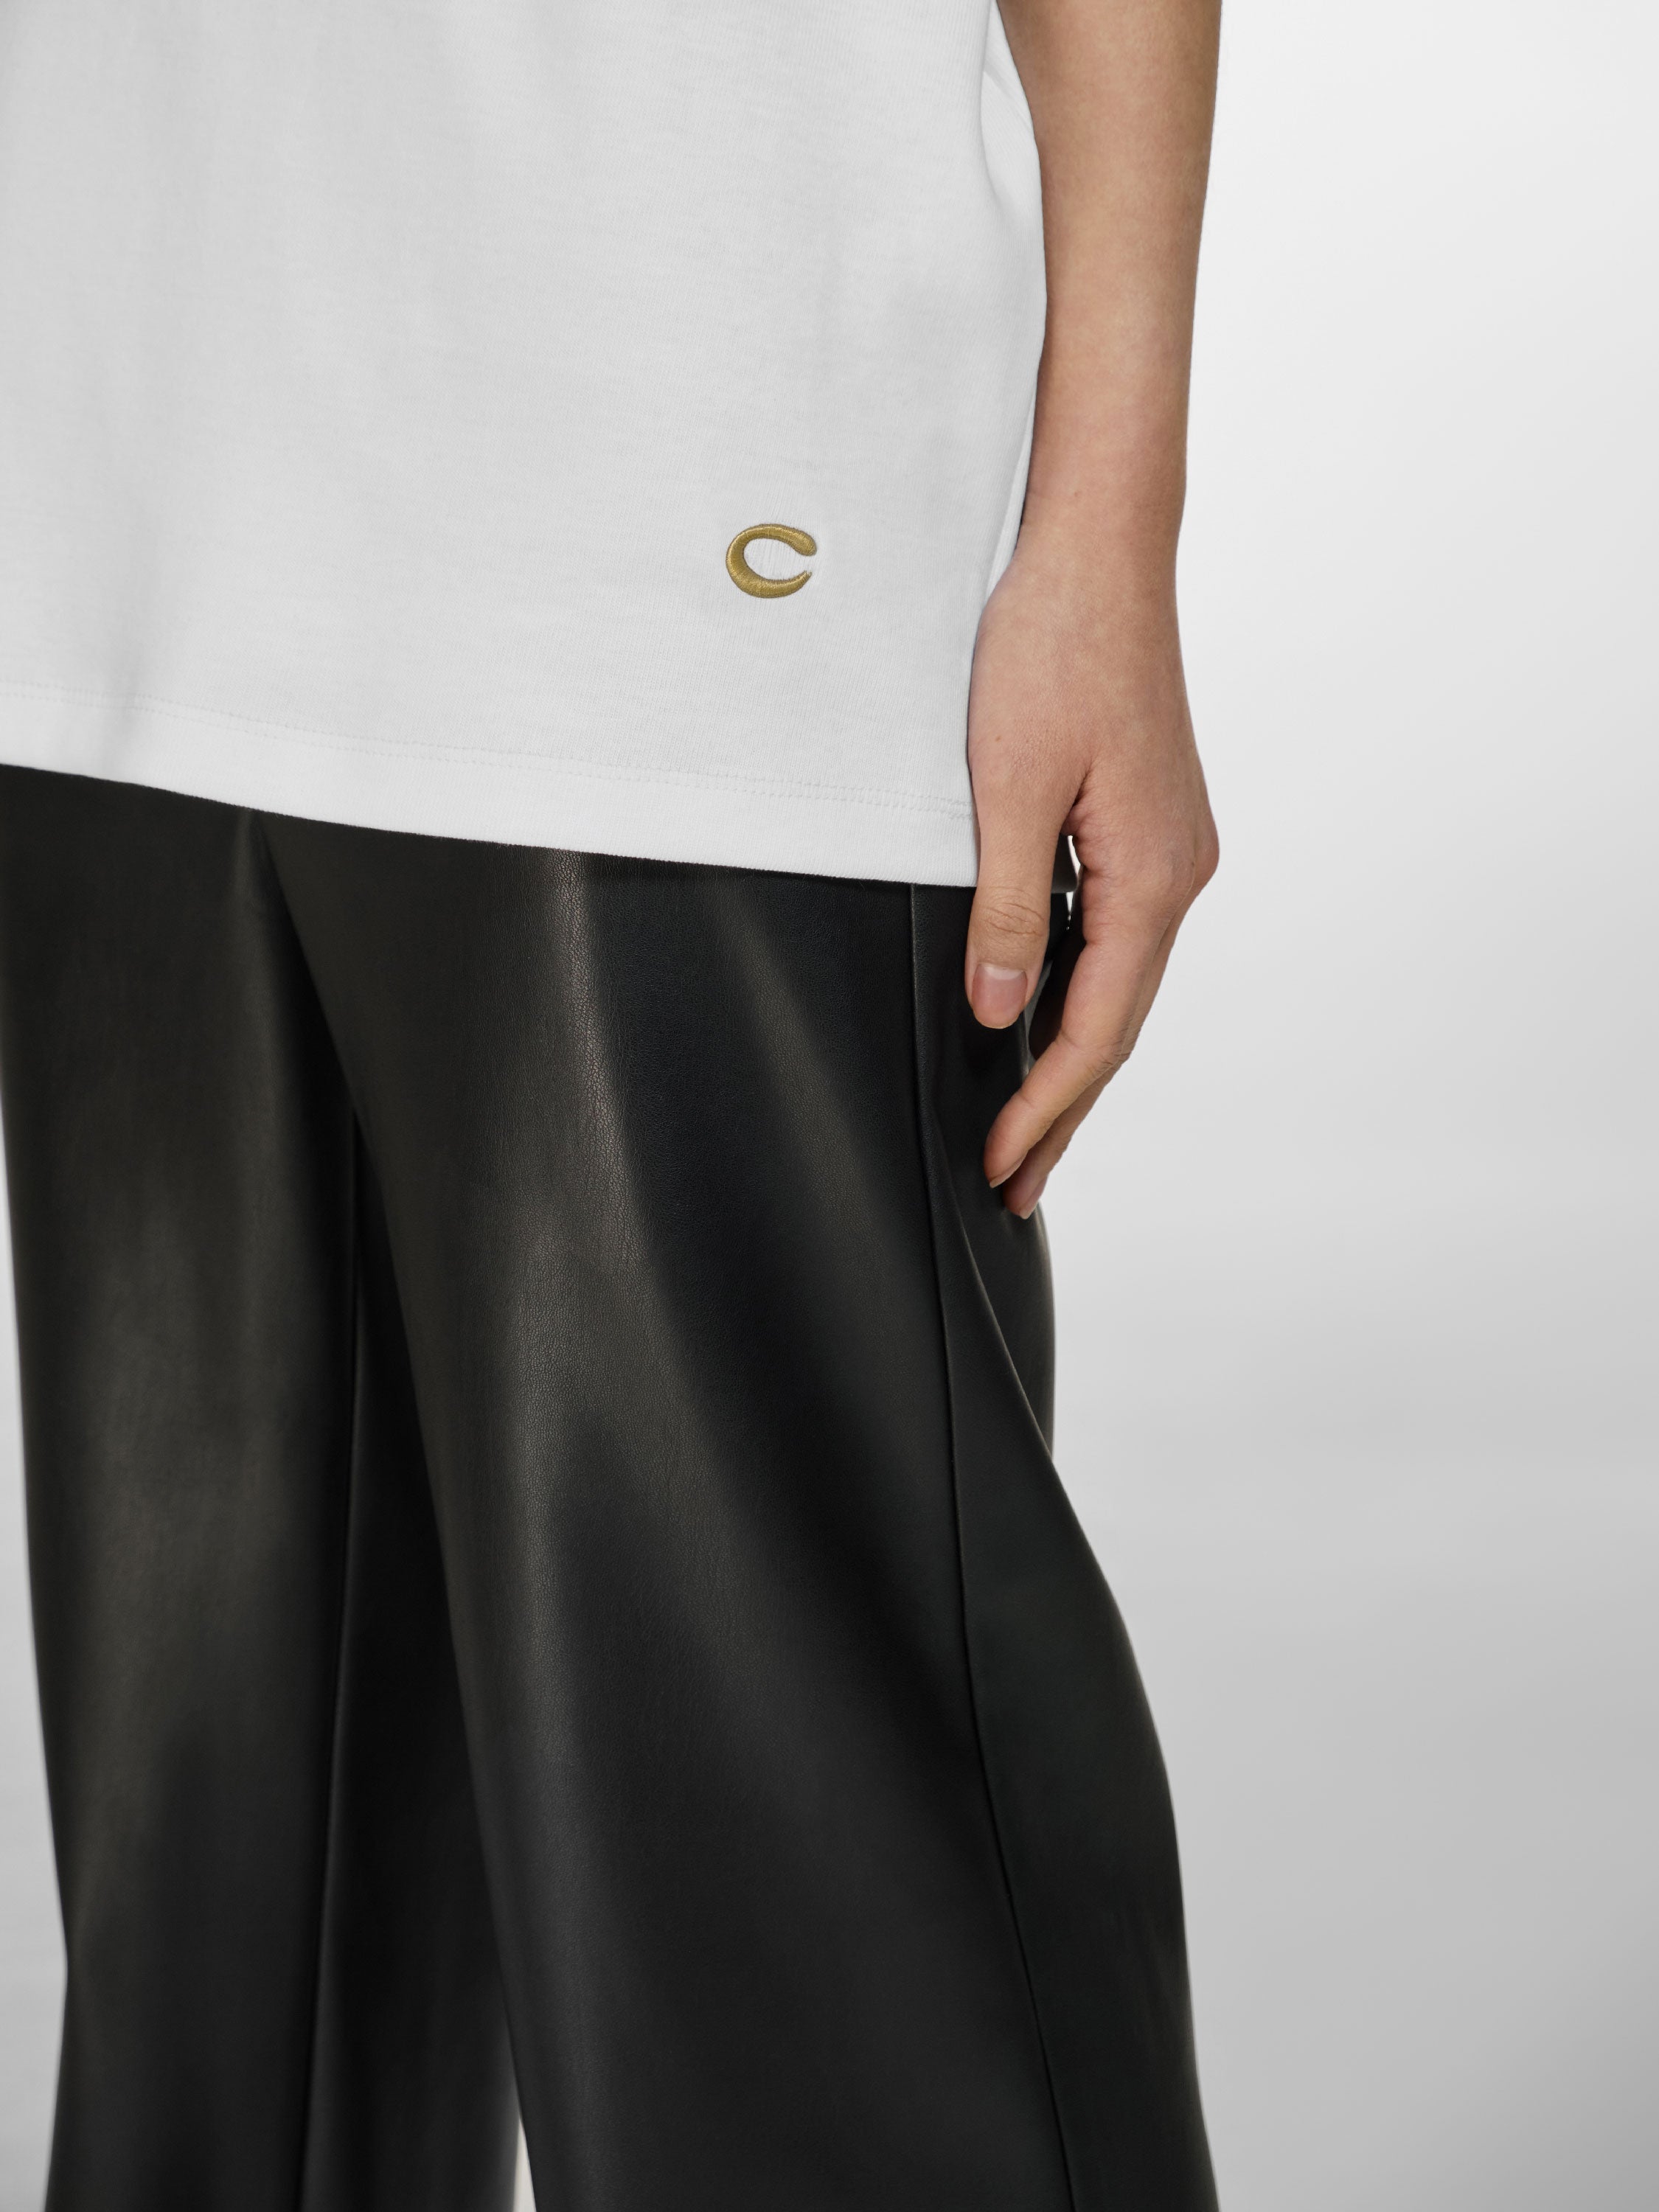 Medium closeup shot of a girl in a white cotton oversized t-shirt and black vegan leather straight leg pants